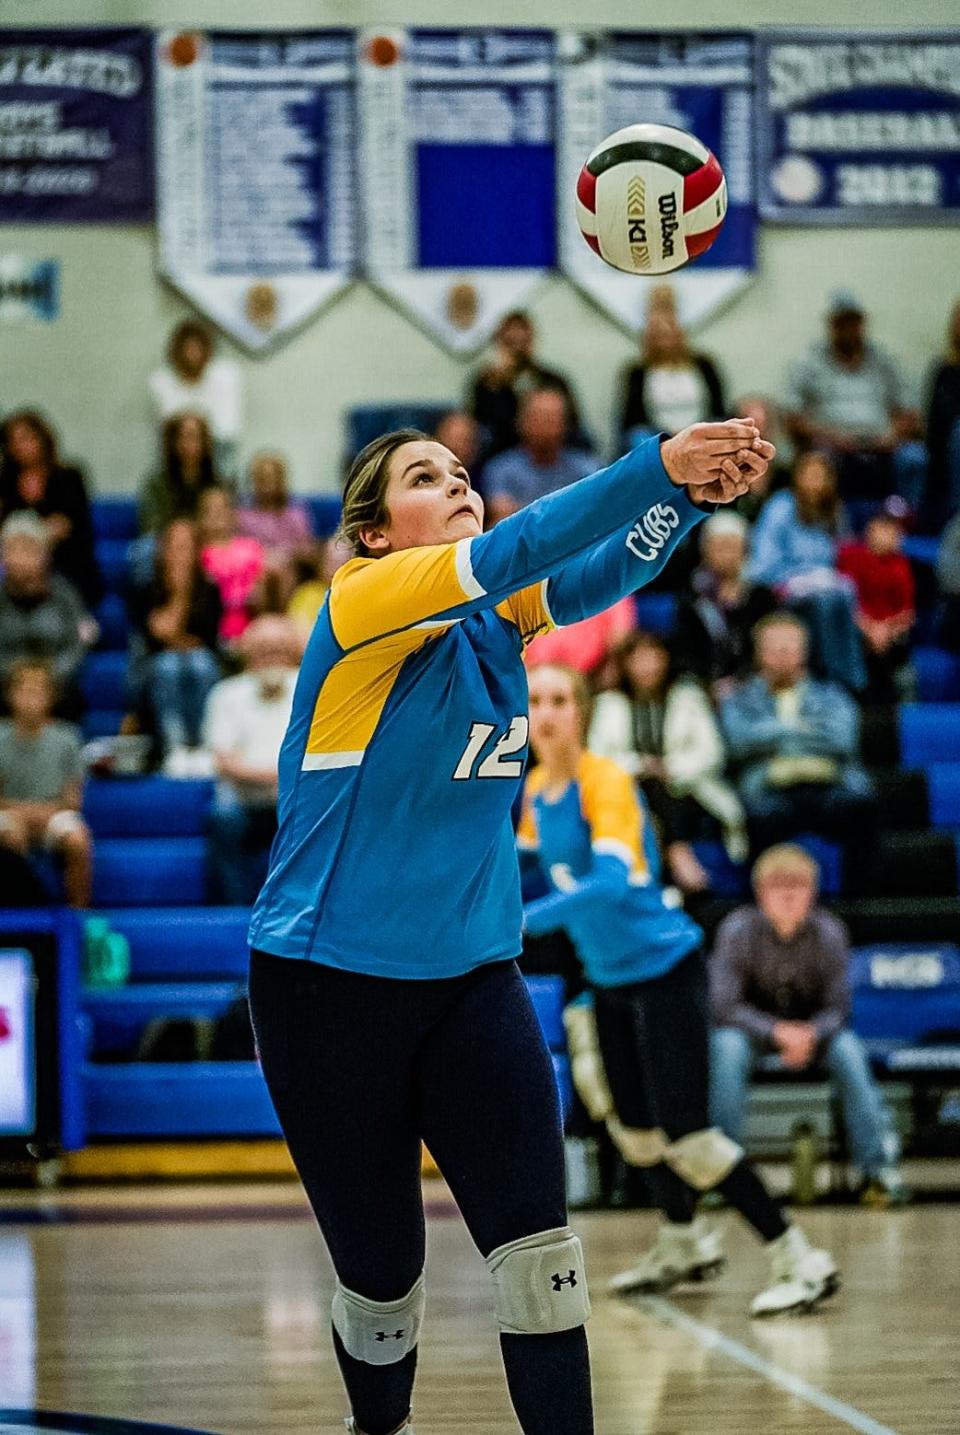 Timnath girls volleyball player Jersey McCollum has been named Blue Federal Credit Union's Athlete of the Week in the Fort Collins area.